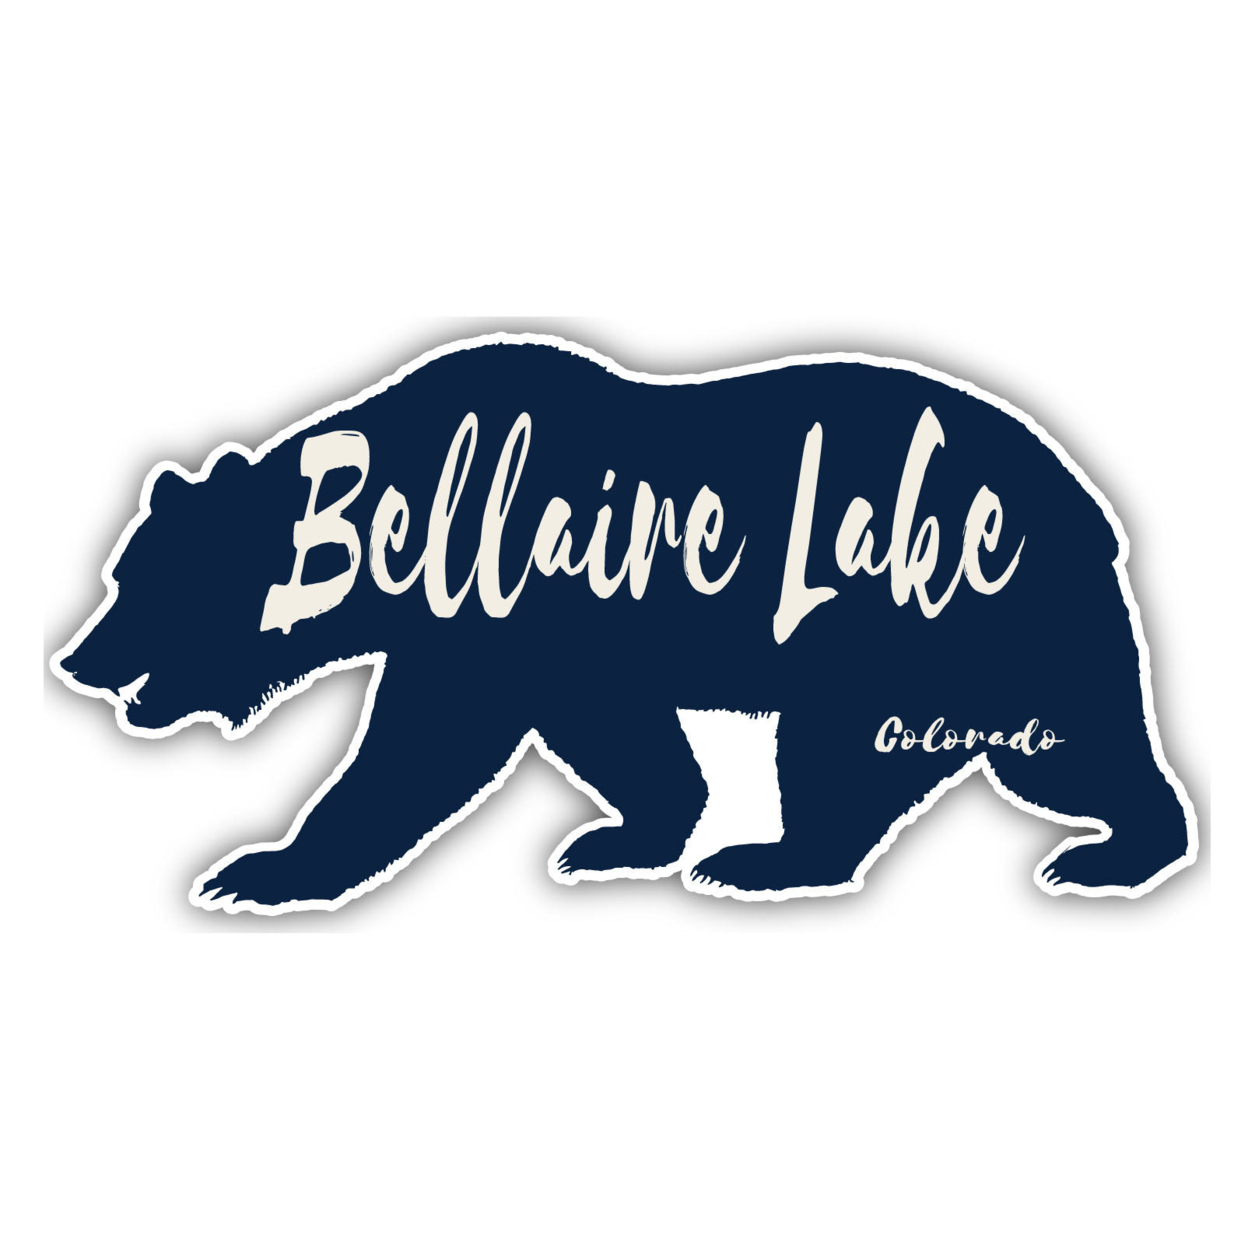 Bellaire Lake Colorado Souvenir Decorative Stickers (Choose Theme And Size) - 4-Pack, 6-Inch, Bear